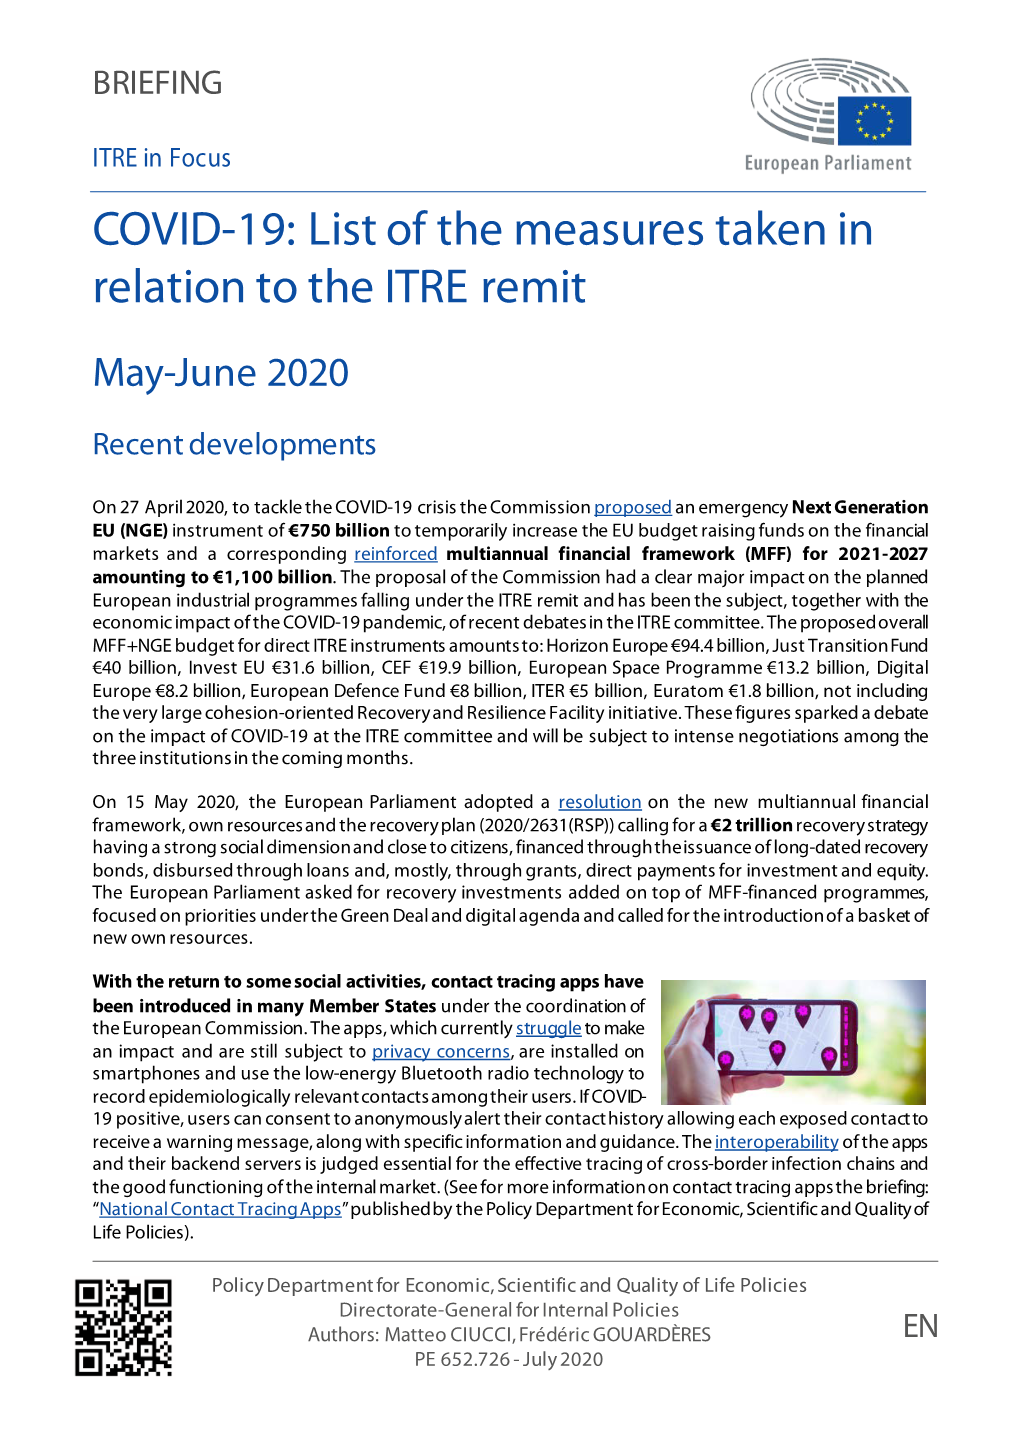 COVID-19: List of the Measures Taken in Relation to the ITRE Remit. May-June 2020